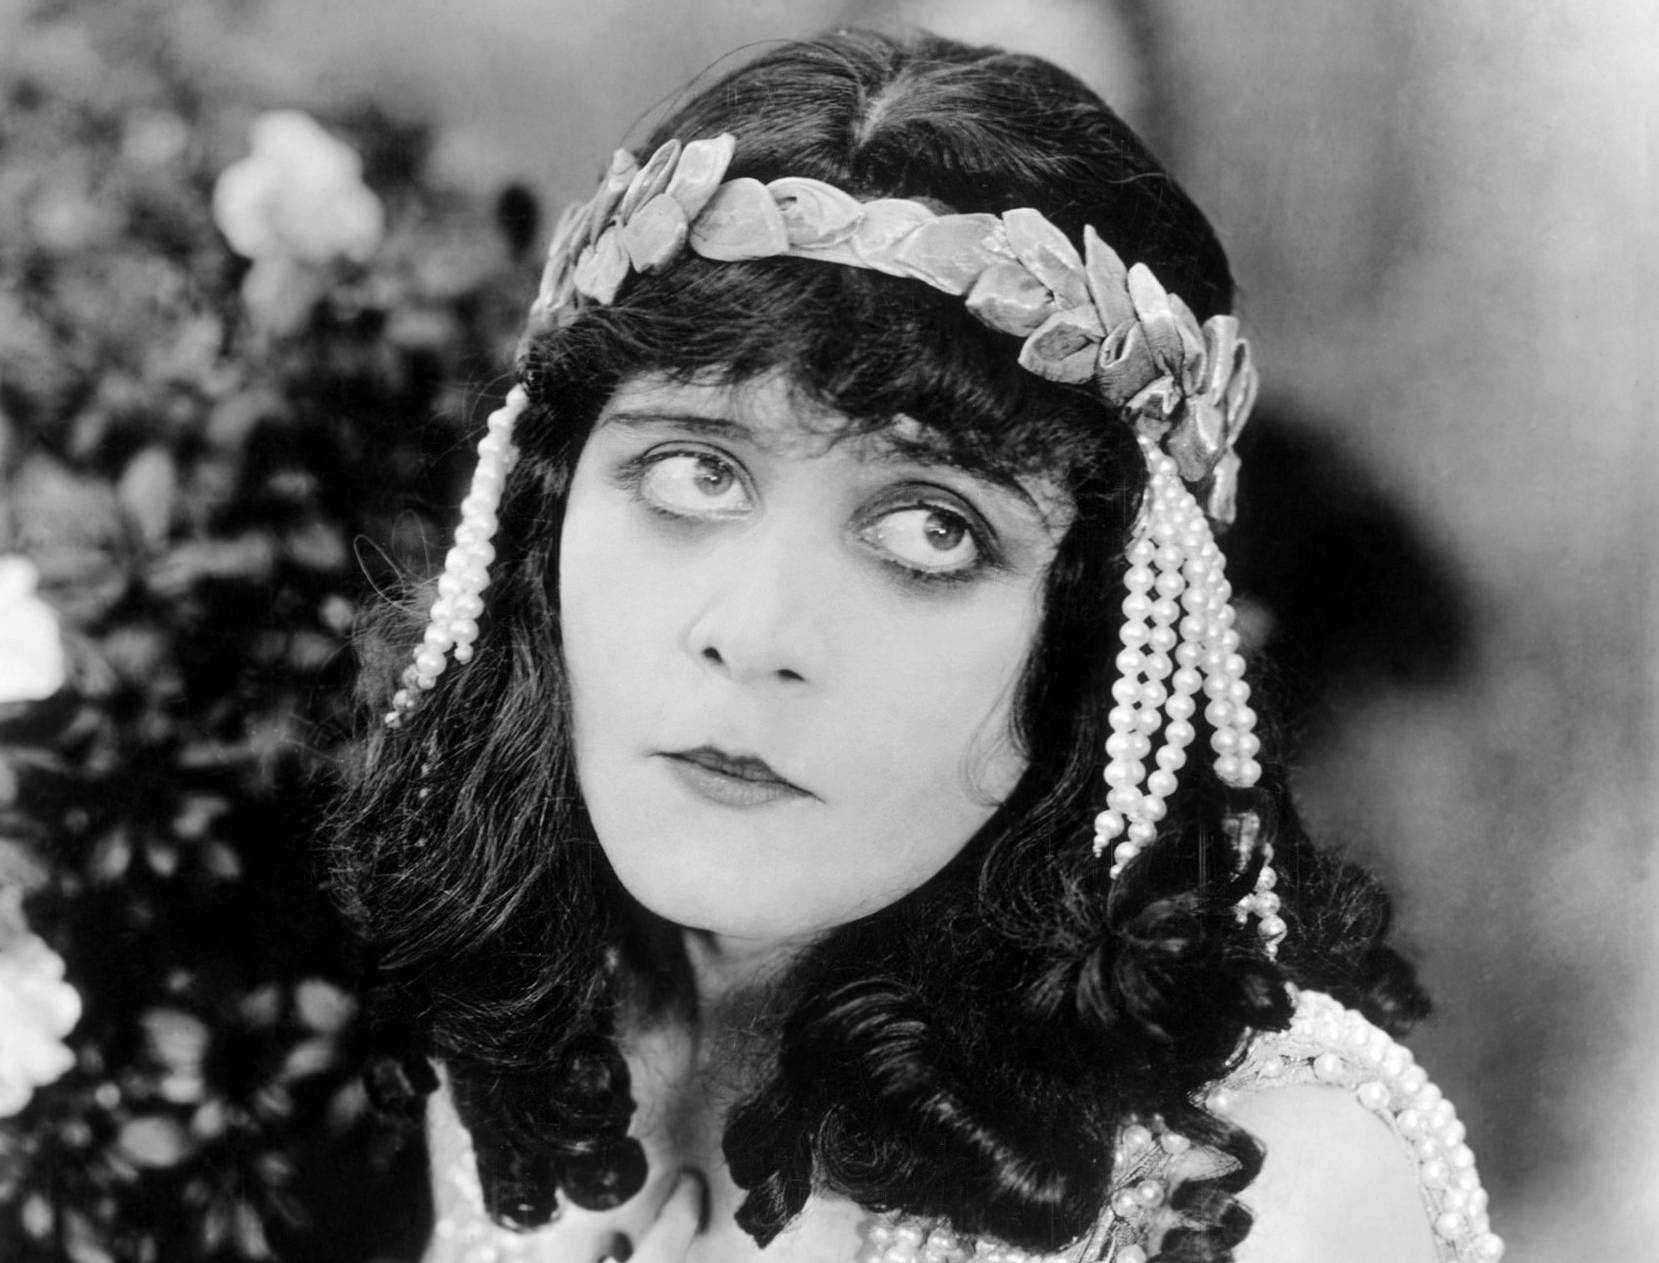 <p>Theda Bara, Hollywood's original sex symbol, captivated audiences with her daring portrayals of man-hunting vamps, clad in risqué attire that pushed boundaries of the era. </p>  <p>Sadly, most of her films have been lost to time, but in 2021, a piece of her cinematic history was rediscovered. </p>